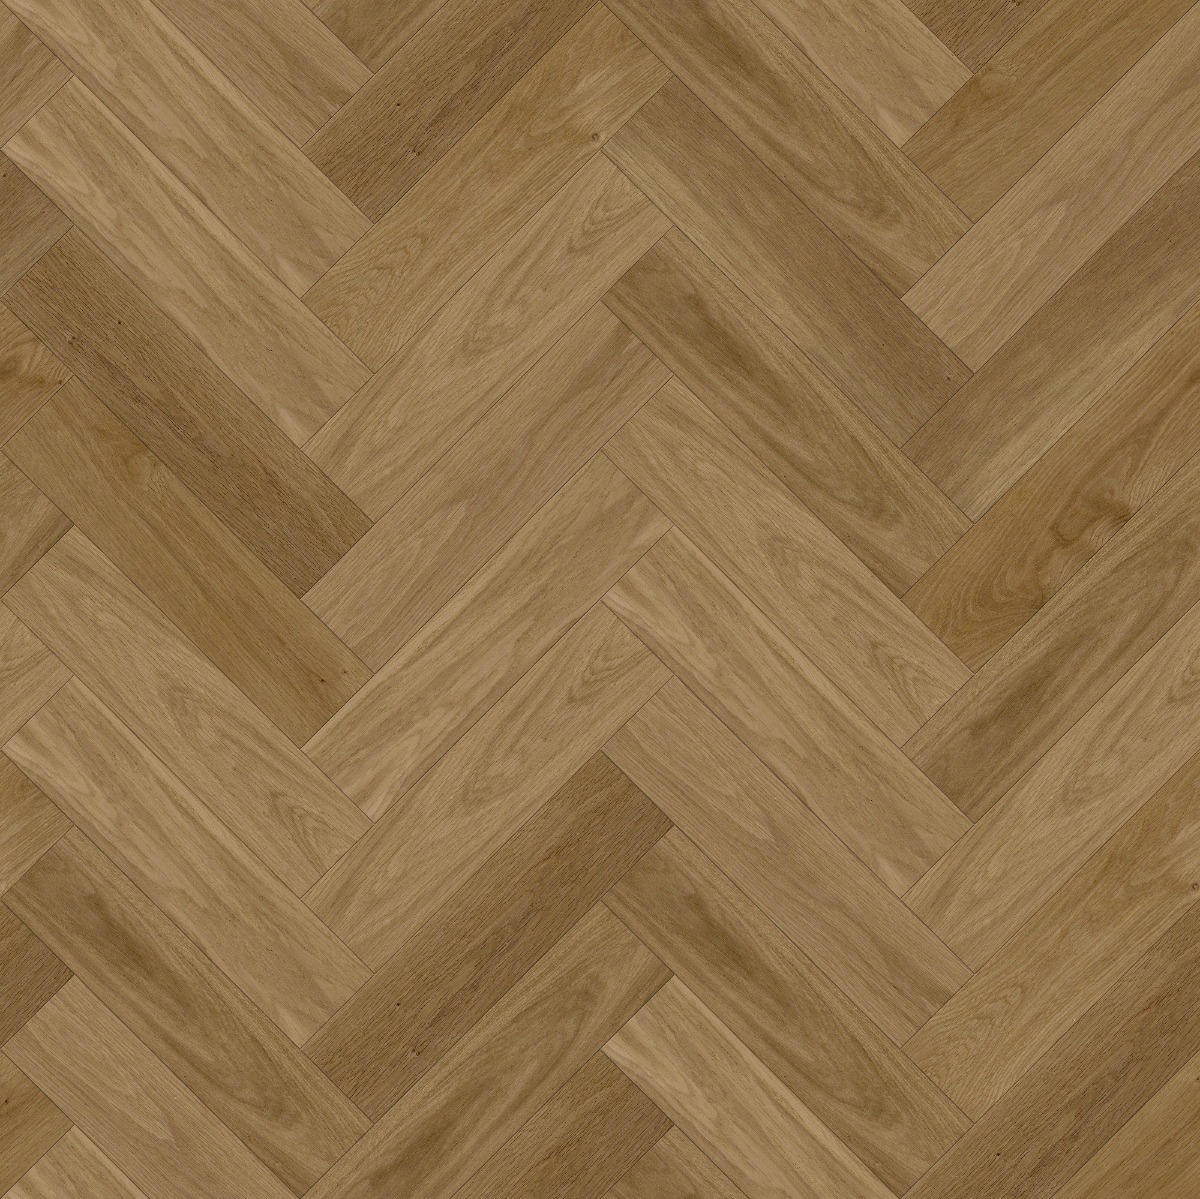 A seamless wood texture with expressive 152 boards arranged in a Herringbone pattern